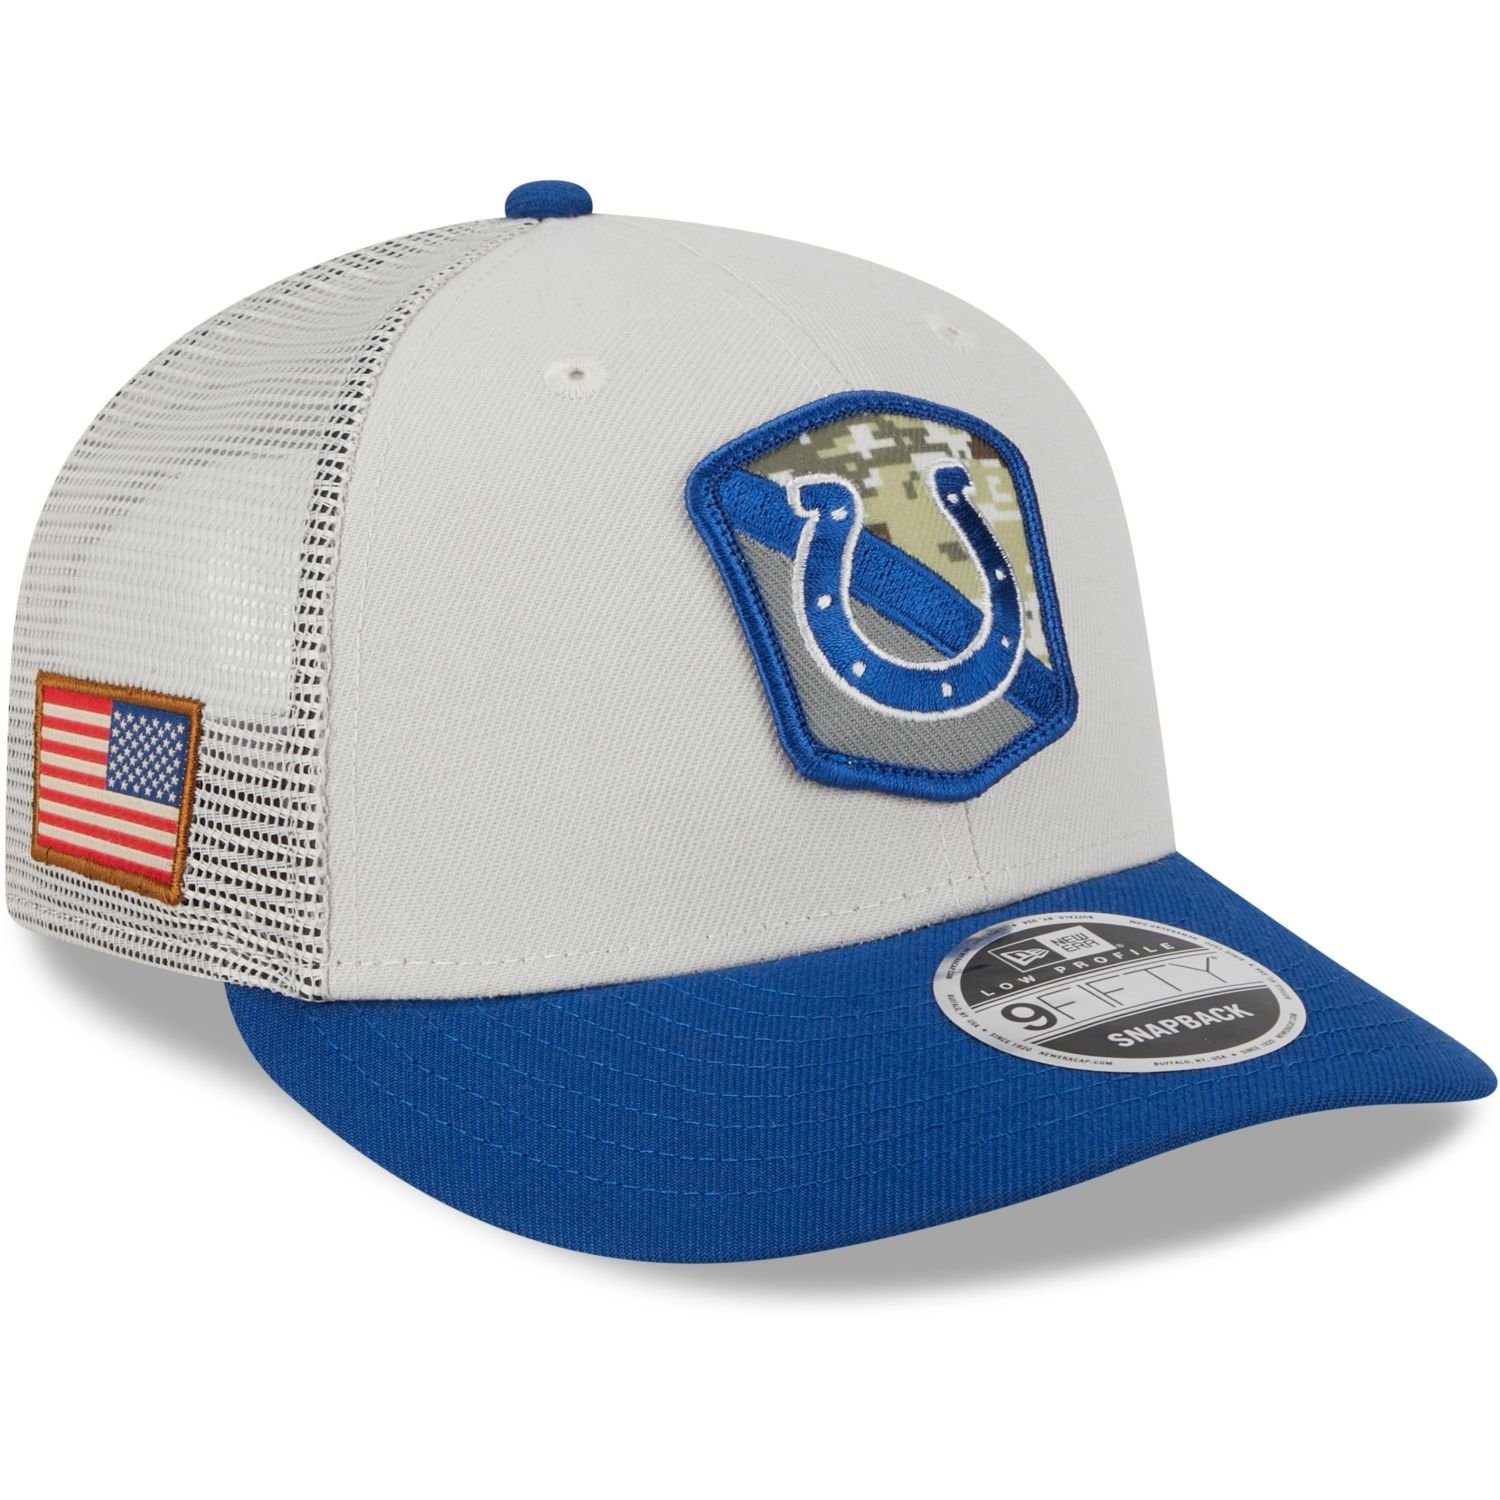 New Era Snapback Cap 9Fifty Low Profile Snap NFL Salute to Service Indianapolis Colts